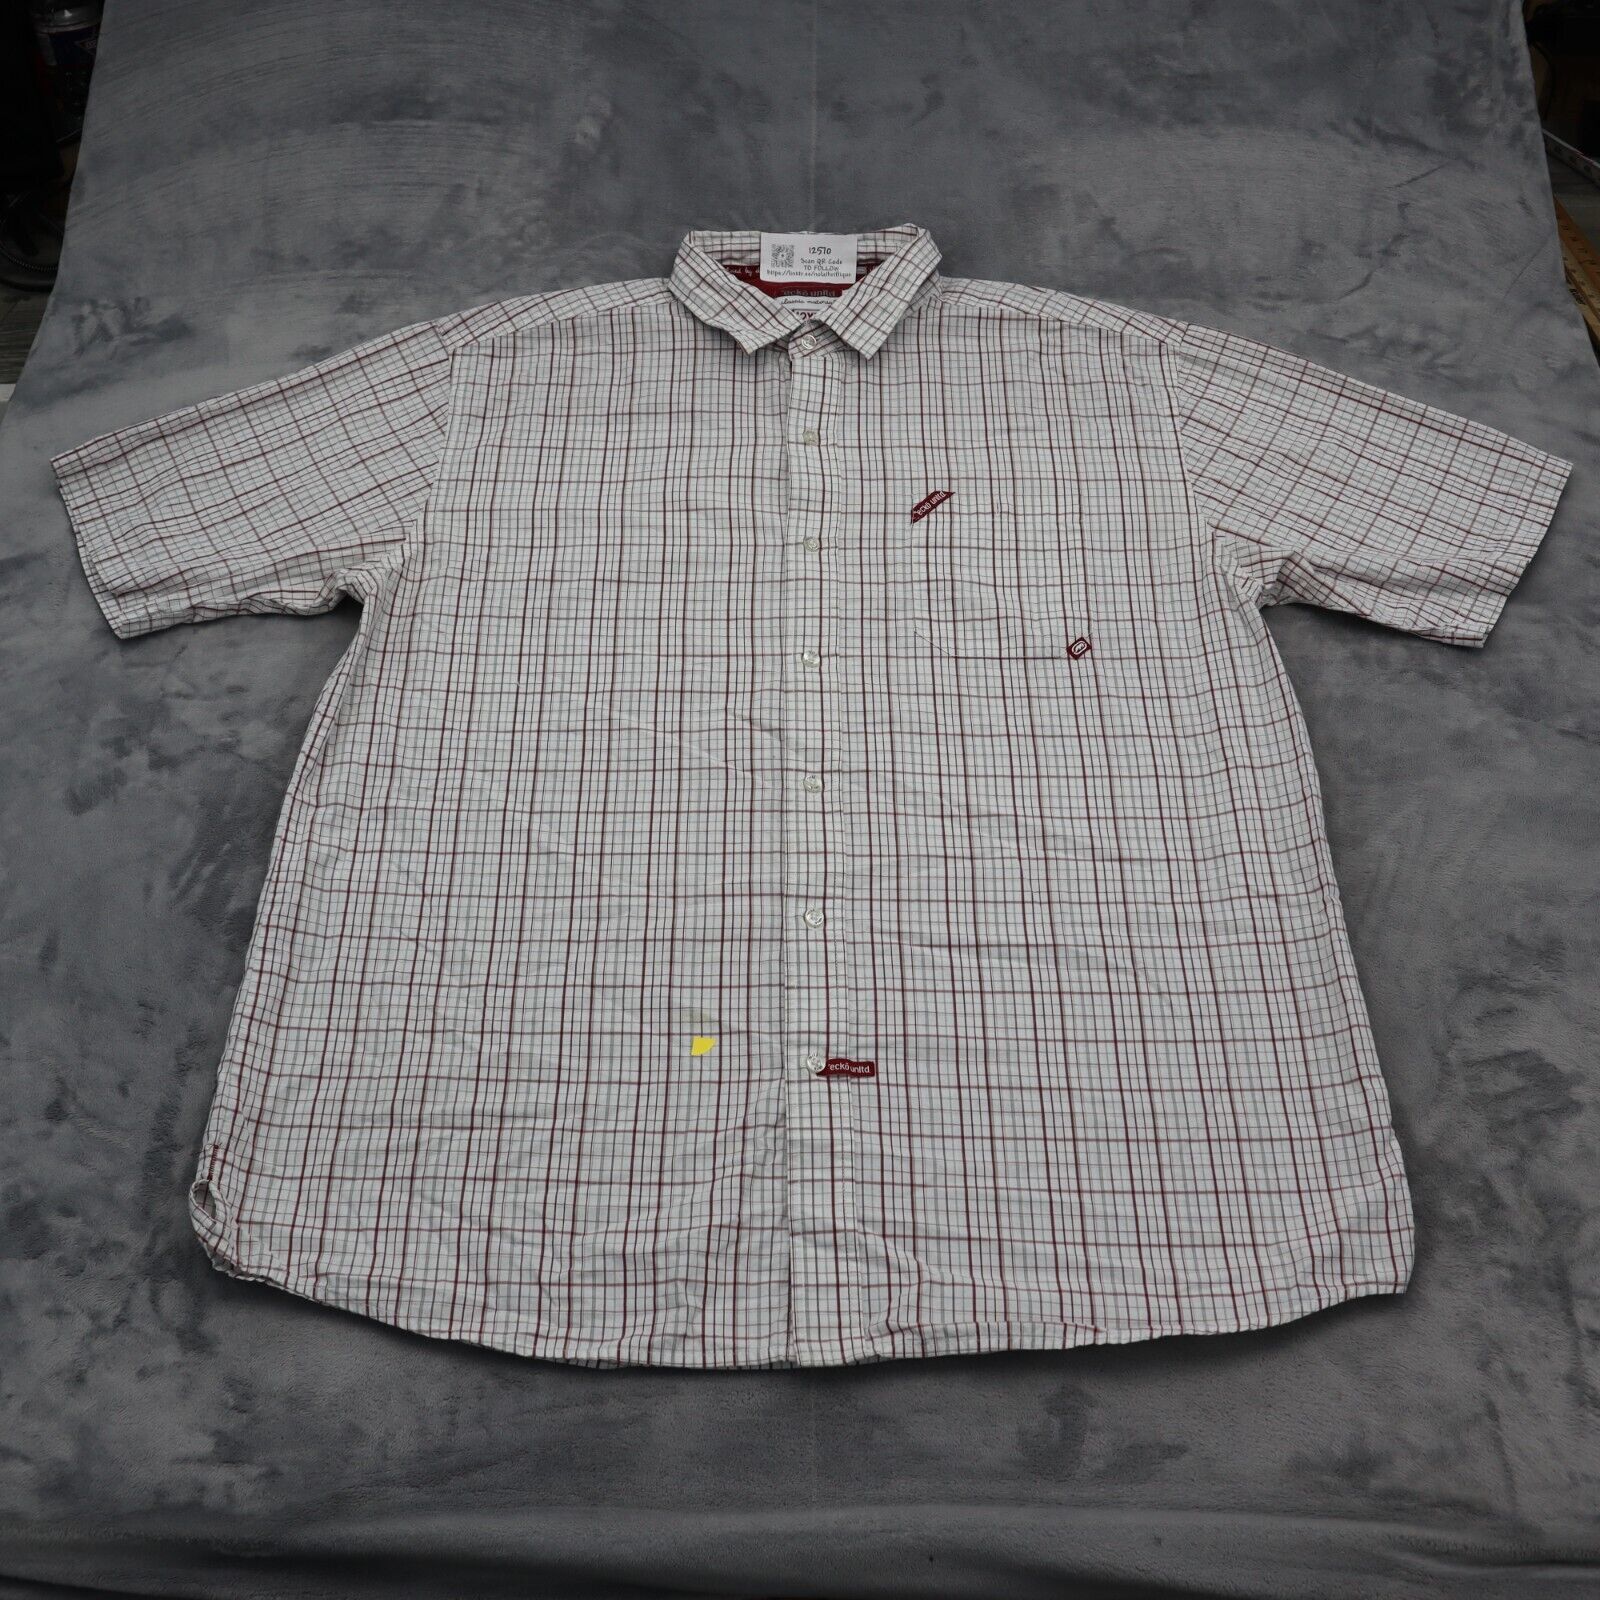 Primary image for Ecko Unltd Shirt Mens 2XL White Red Plaid Classic Short Sleeve Collared Top